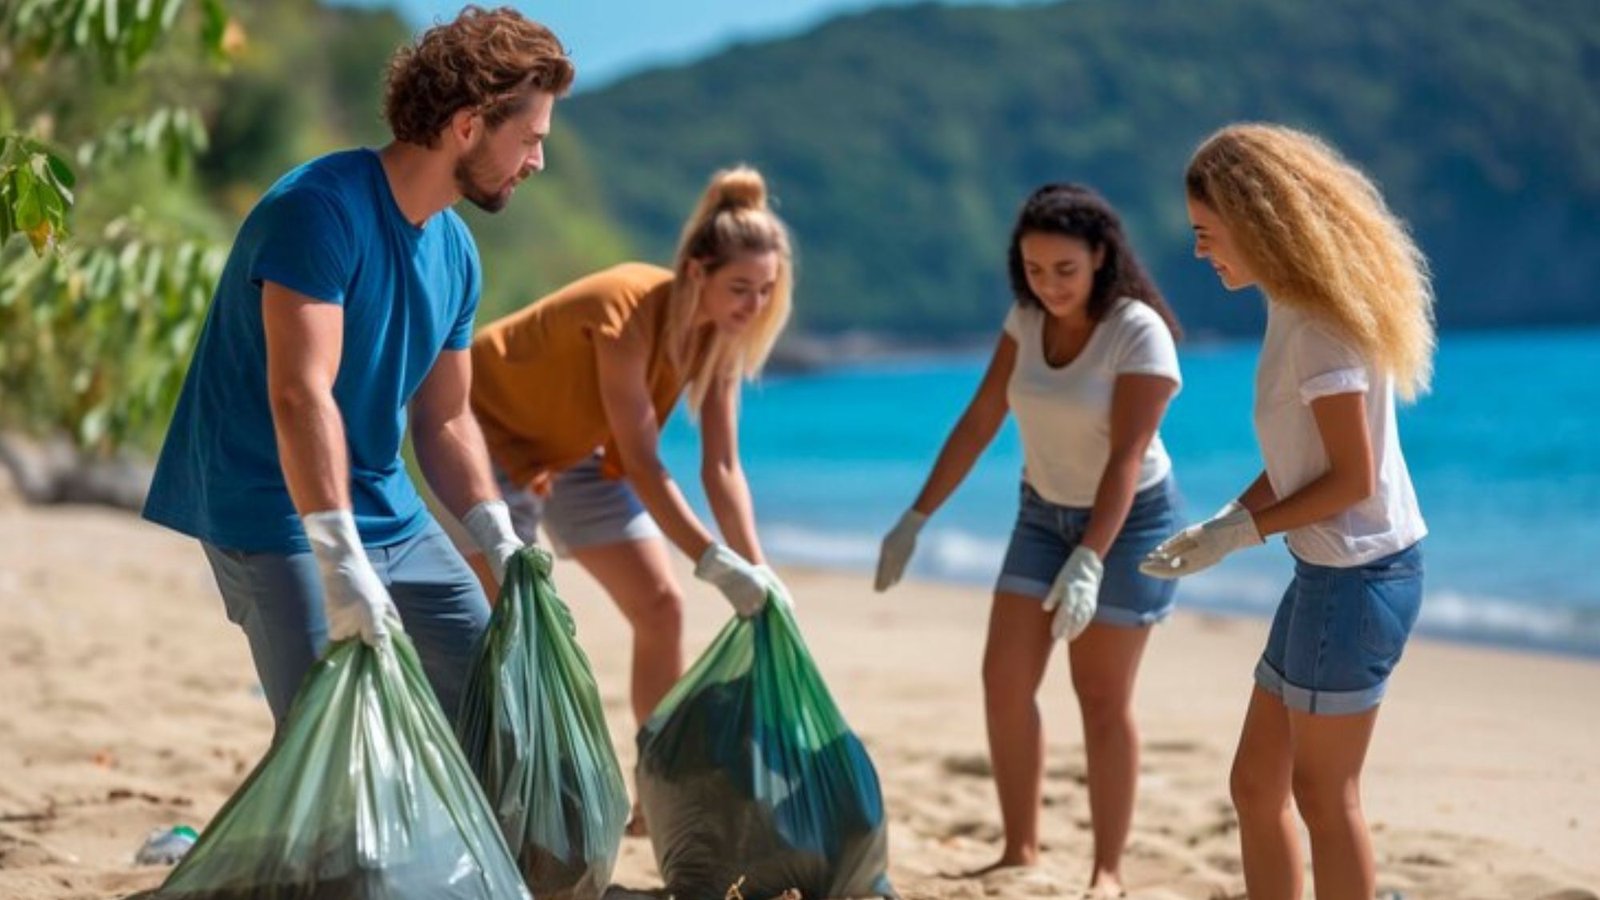 A group of friends trying to maintain cleanliness on the beach